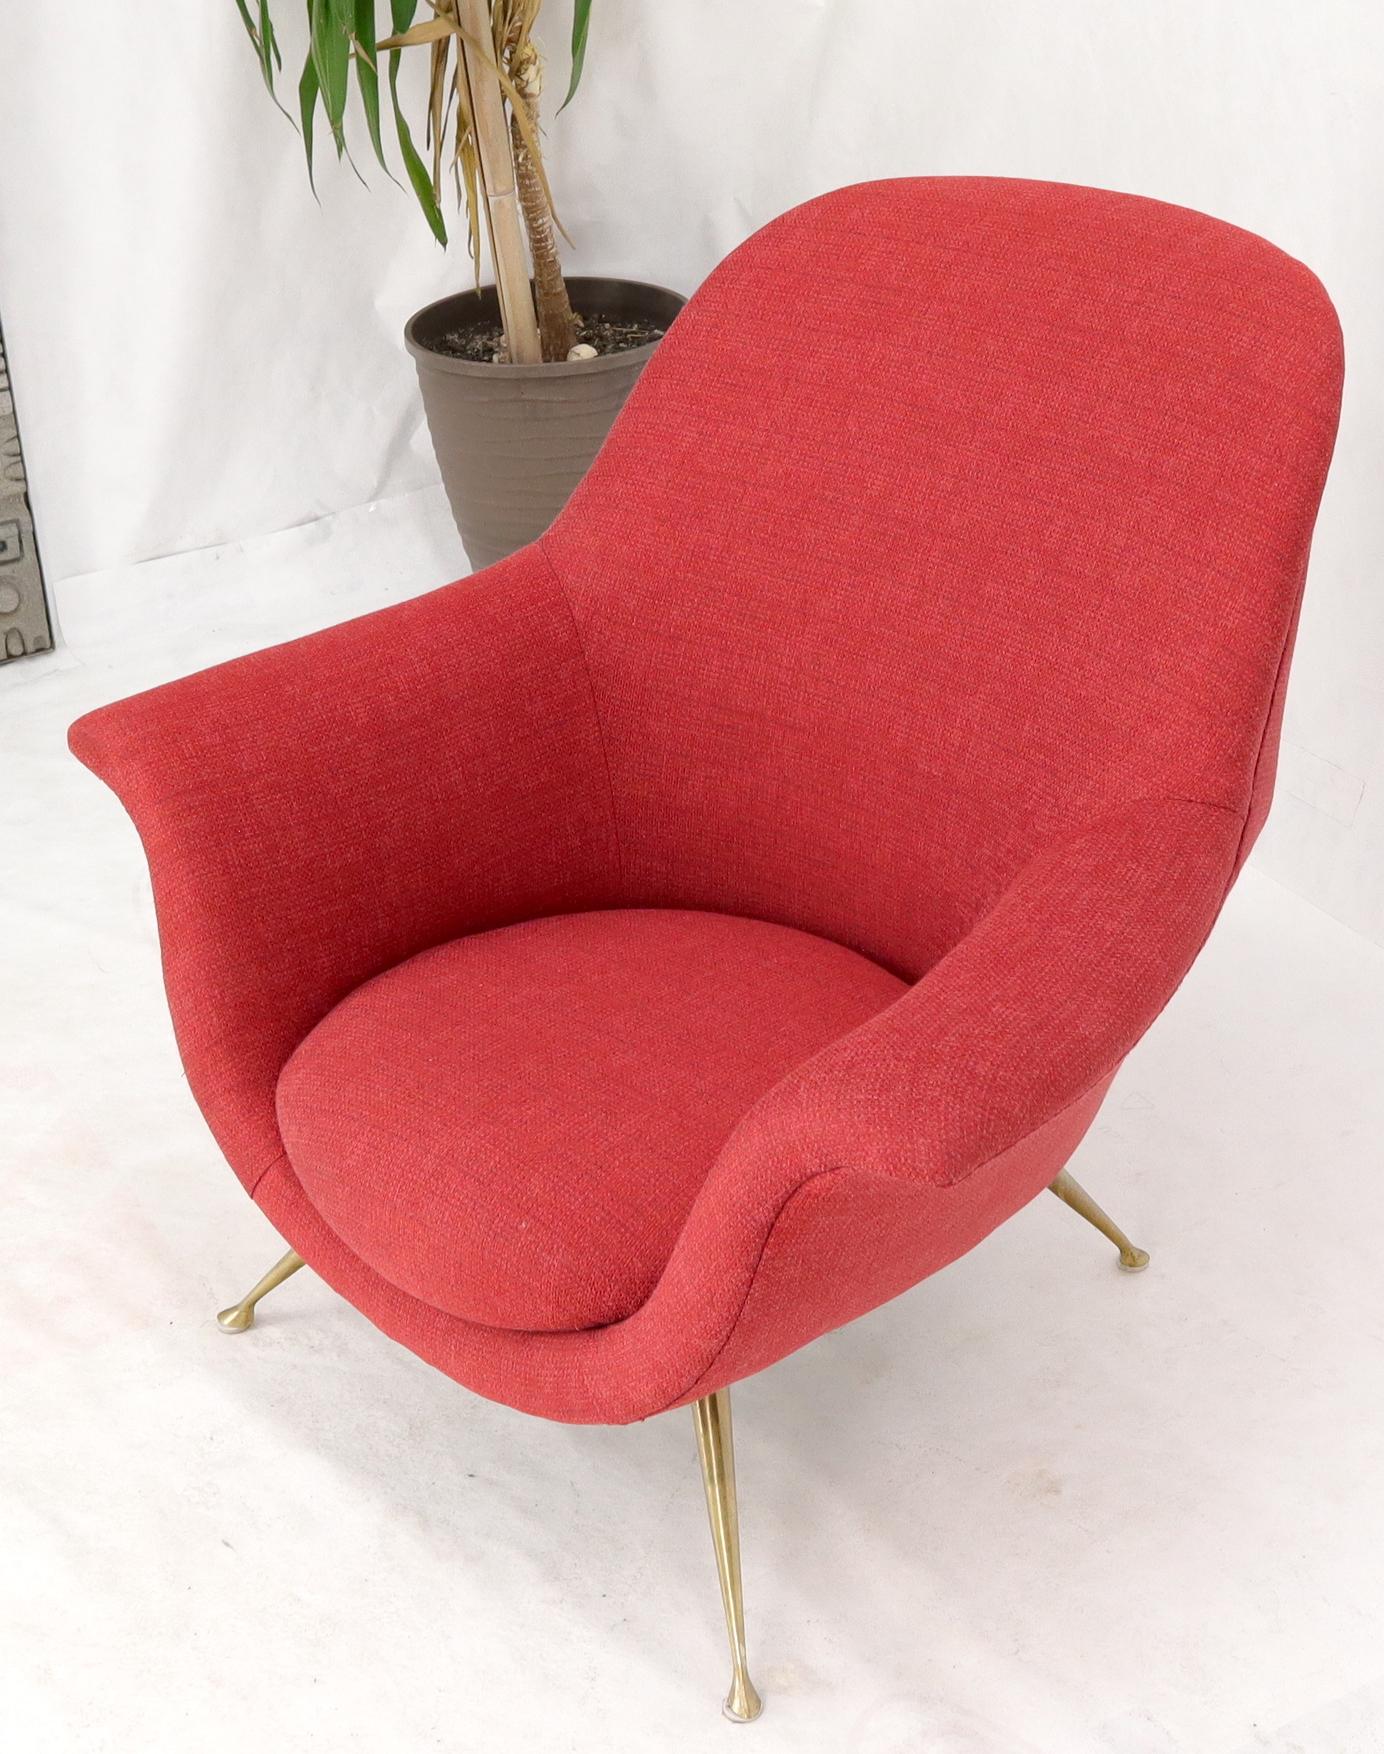 20th Century Italian Mid-Century Modern New Red Upholstery Lounge Chair on Solid Brass Legs For Sale